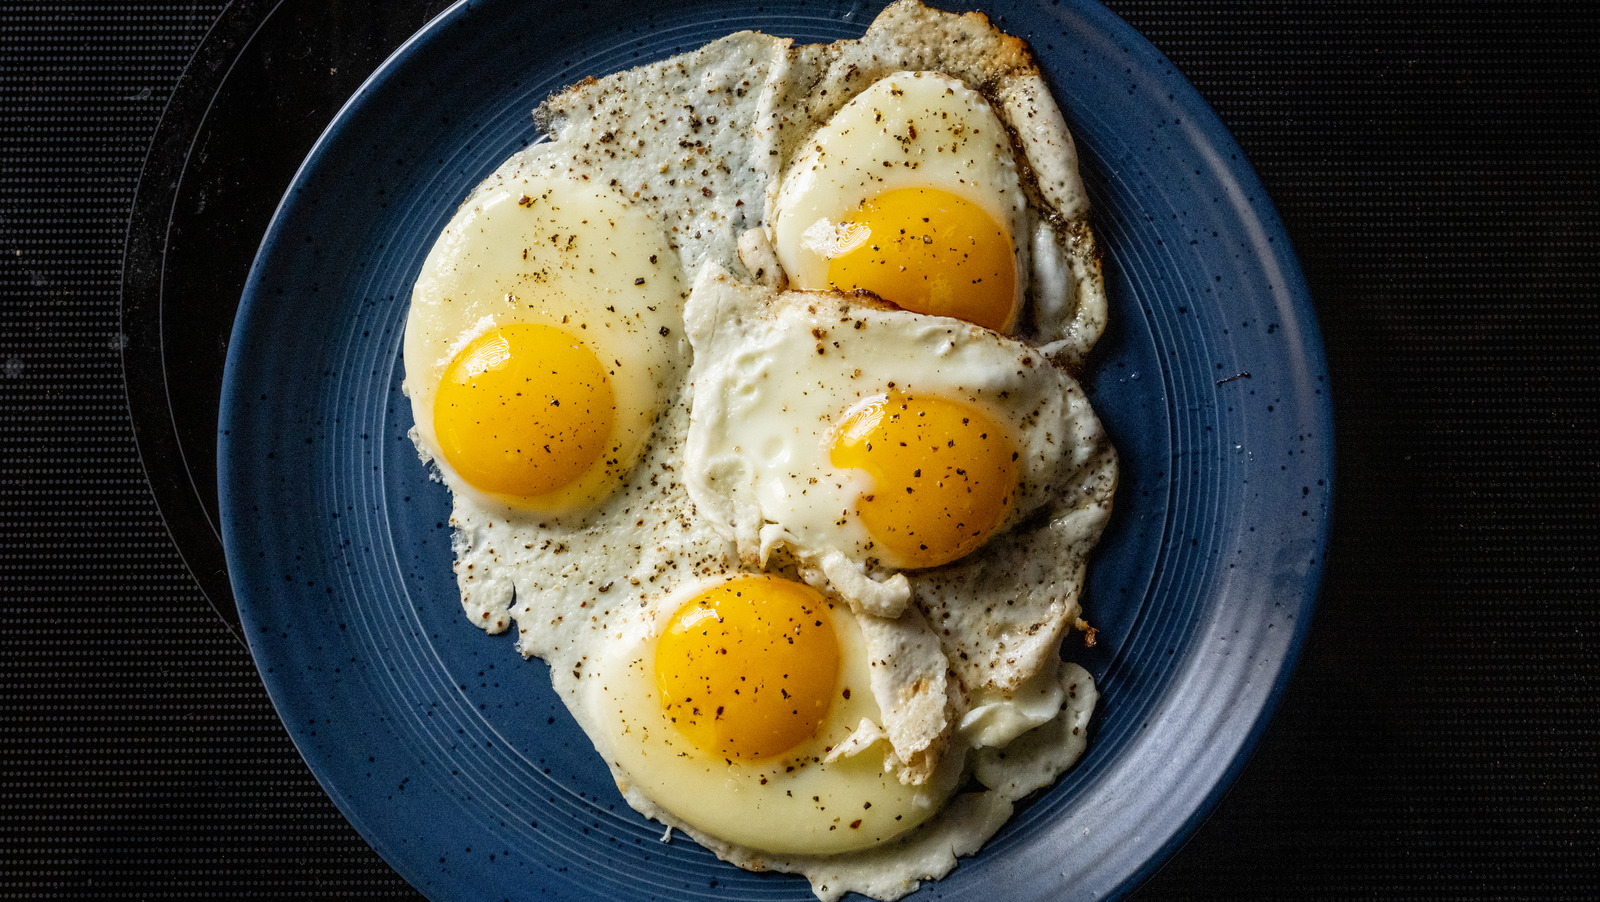 https://www.thedailymeal.com/img/gallery/how-a-mason-jar-can-help-make-perfect-fried-eggs/l-intro-1683127699.jpg